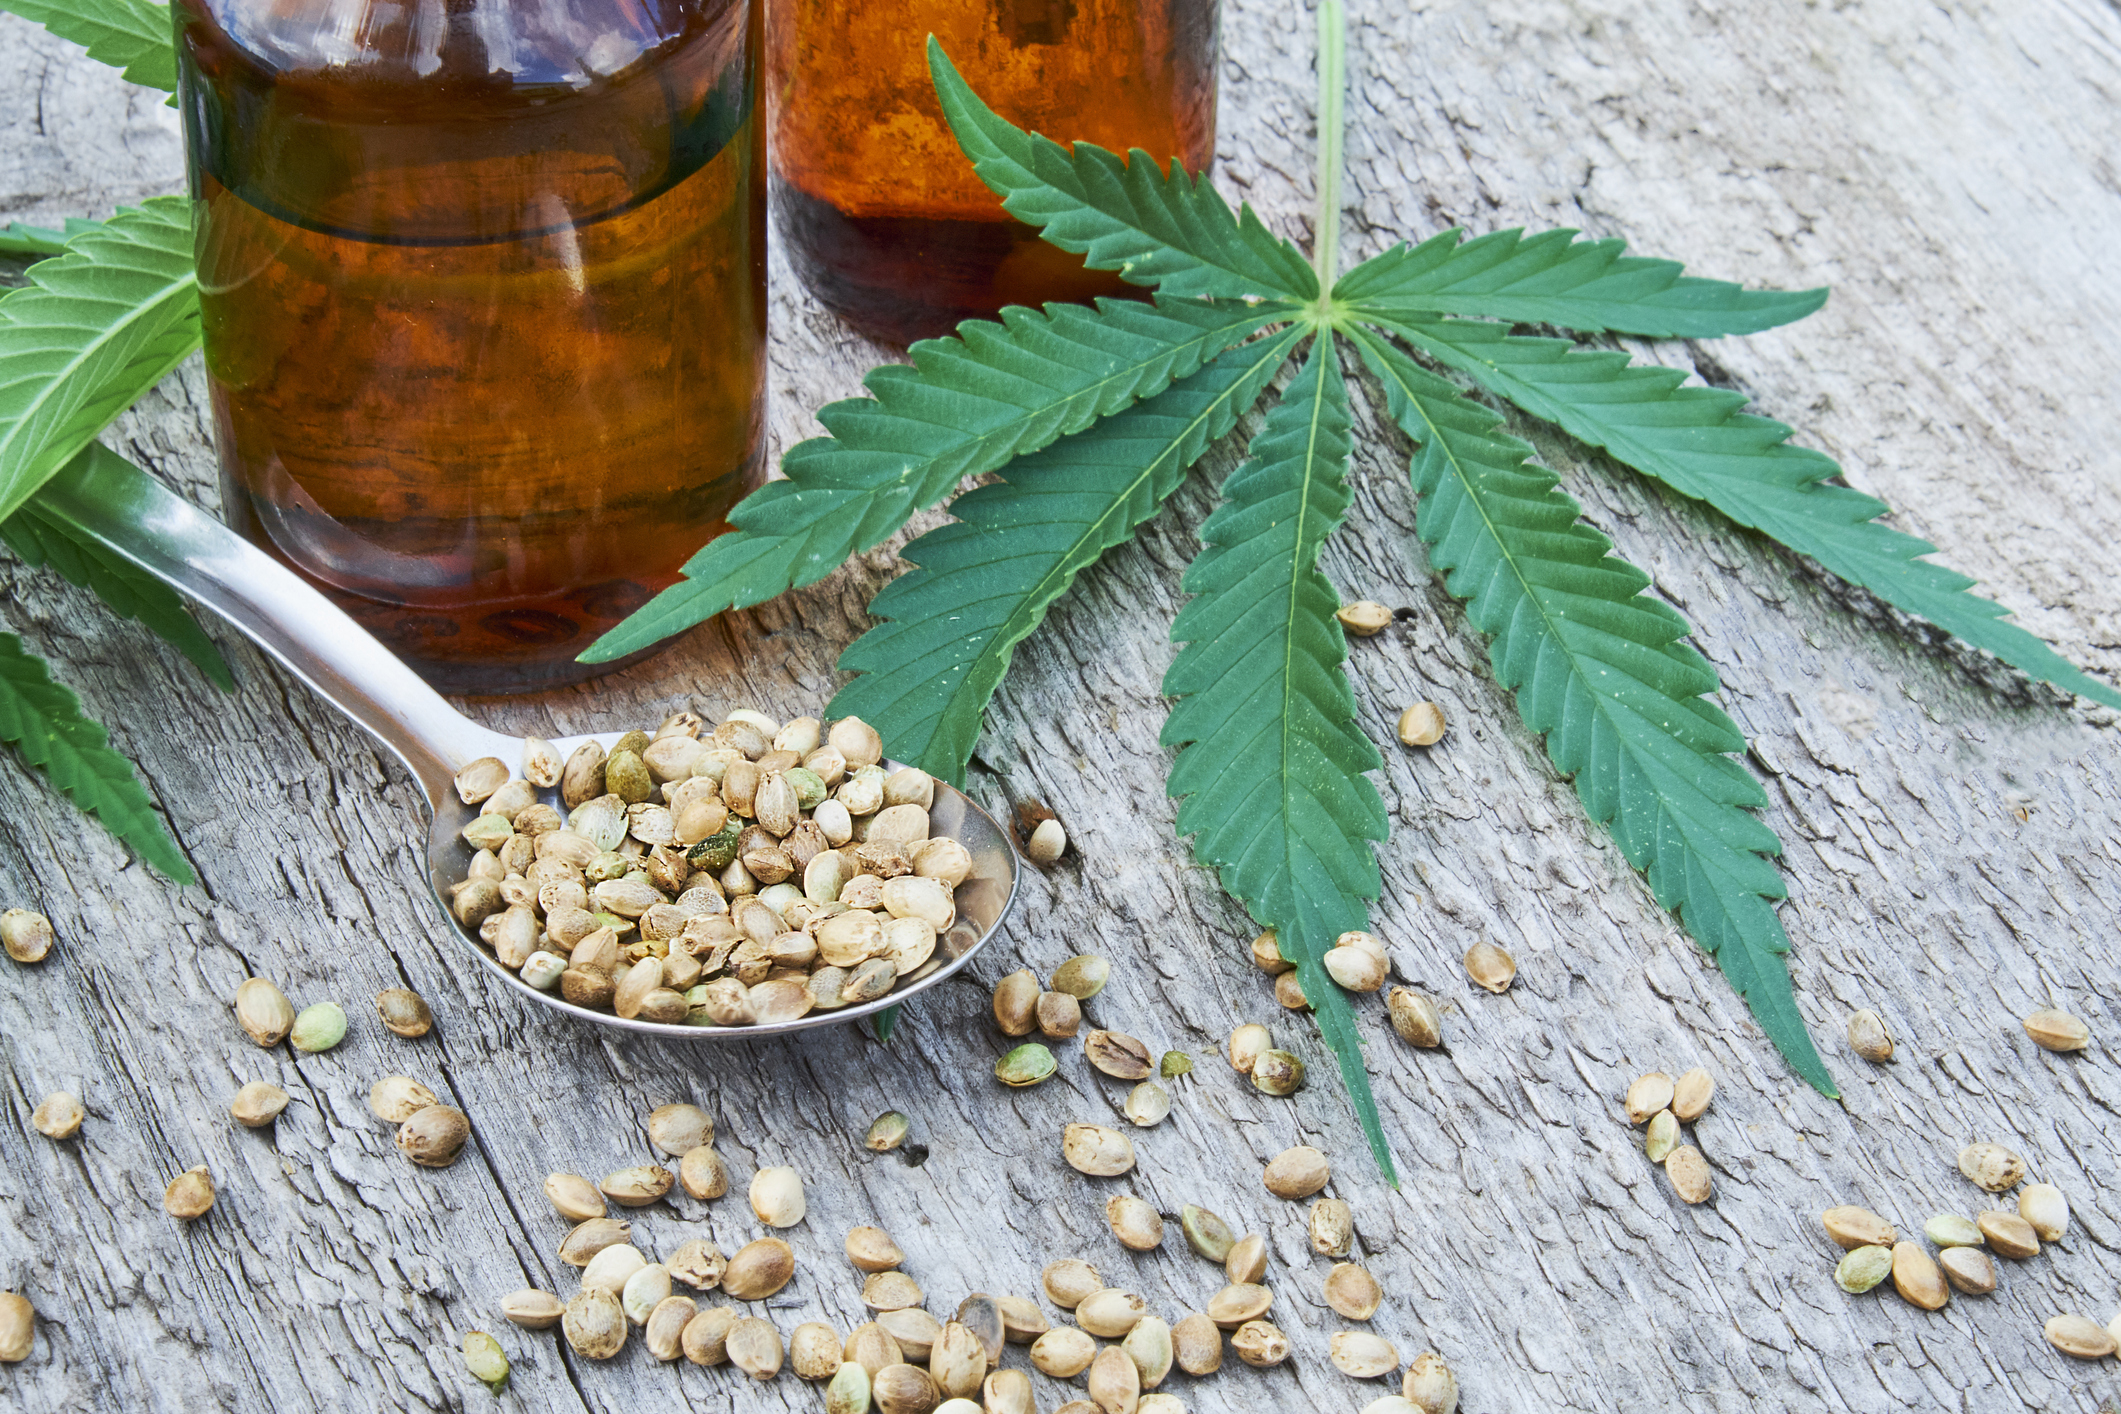 hemp leaves, seeds, cannabis oil extracts in jars